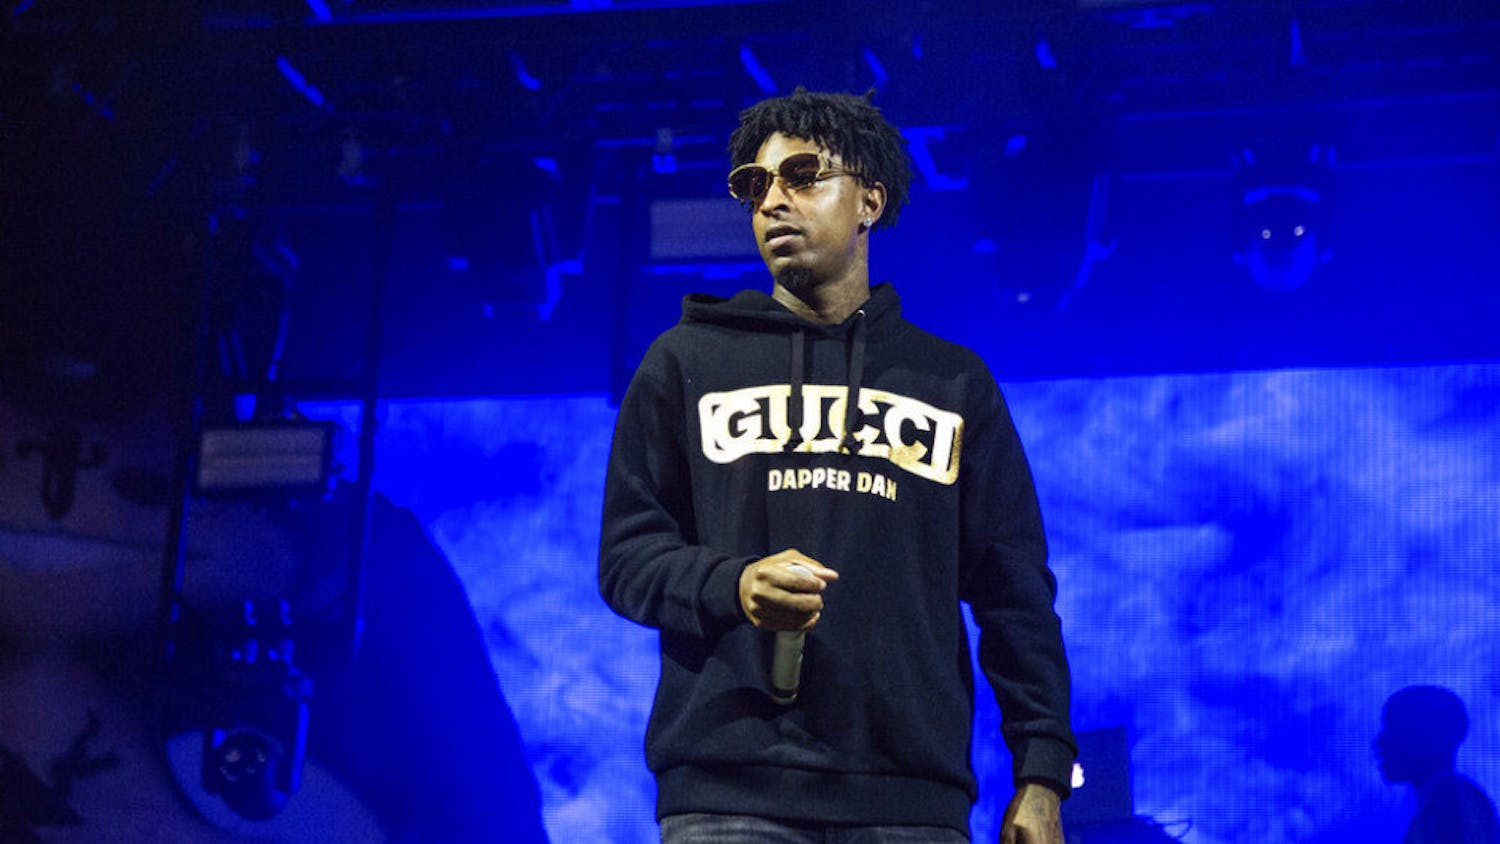 FILE - In this Sunday, Oct. 28, 2018, file photo, 21 Savage performs at the Voodoo Music Experience in City Park in New Orleans. Authorities in Atlanta say Grammy-nominated rapper 21 Savage is in federal immigration custody. U.S. Immigration and Customs Enforcement spokesman Bryan Cox says the artist, whose given name is Sha Yaa Bin Abraham-Joseph, was arrested in a targeted operation early Sunday, Feb. 3, 2019, in the Atlanta area. (Photo by Amy Harris/Invision/AP, File)